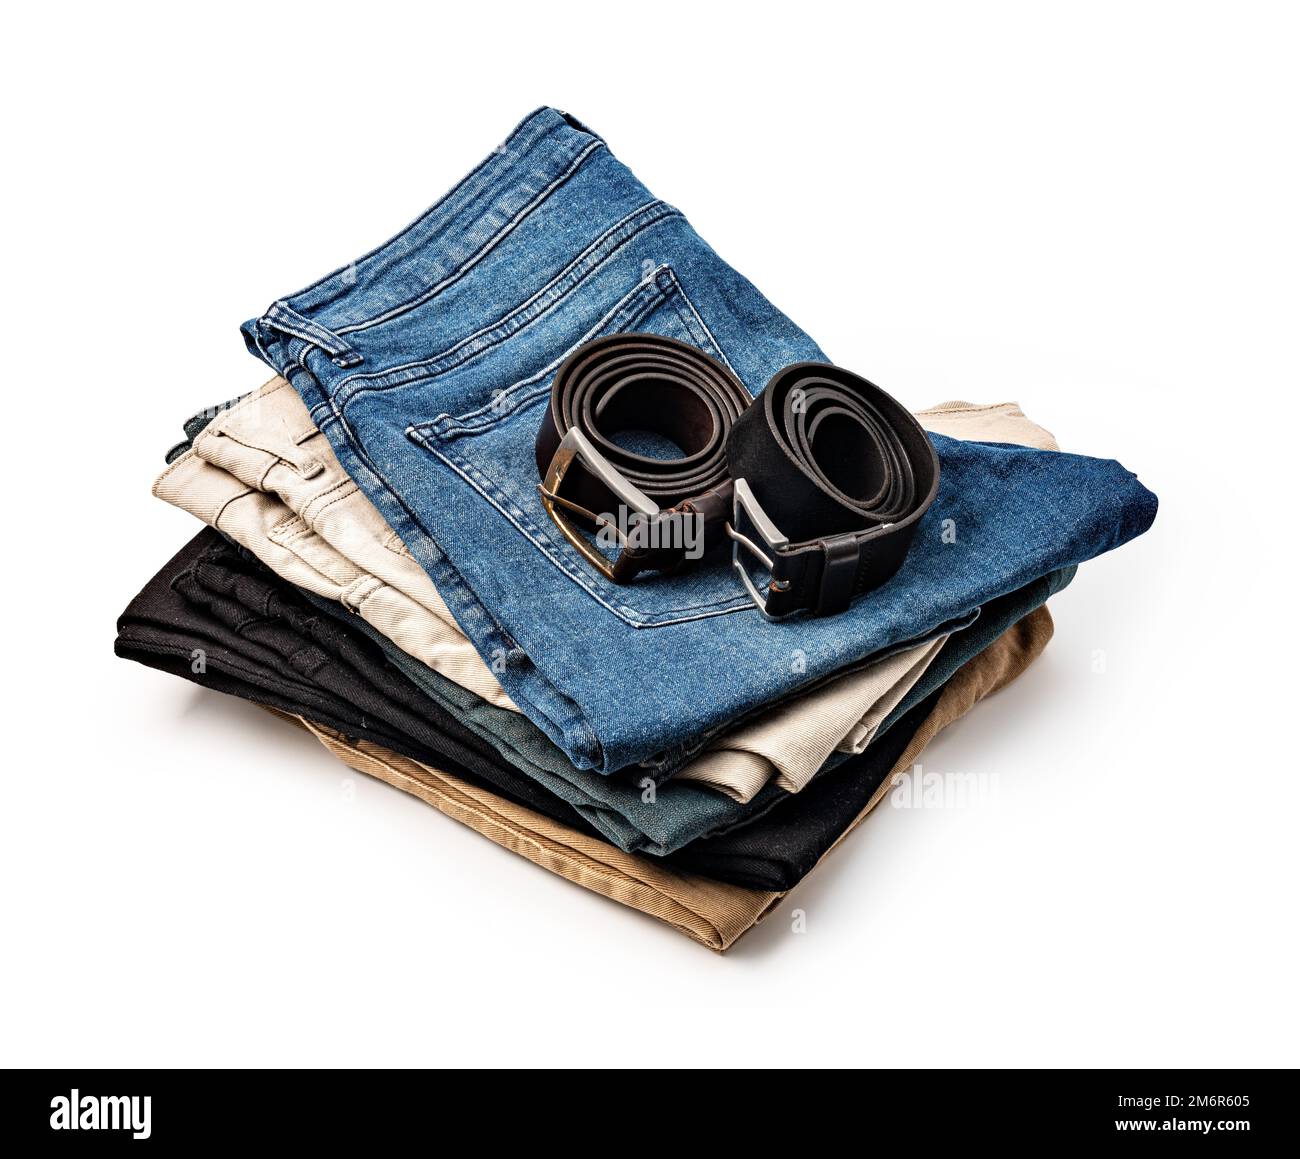 Jeans and leather belt Stock Photo